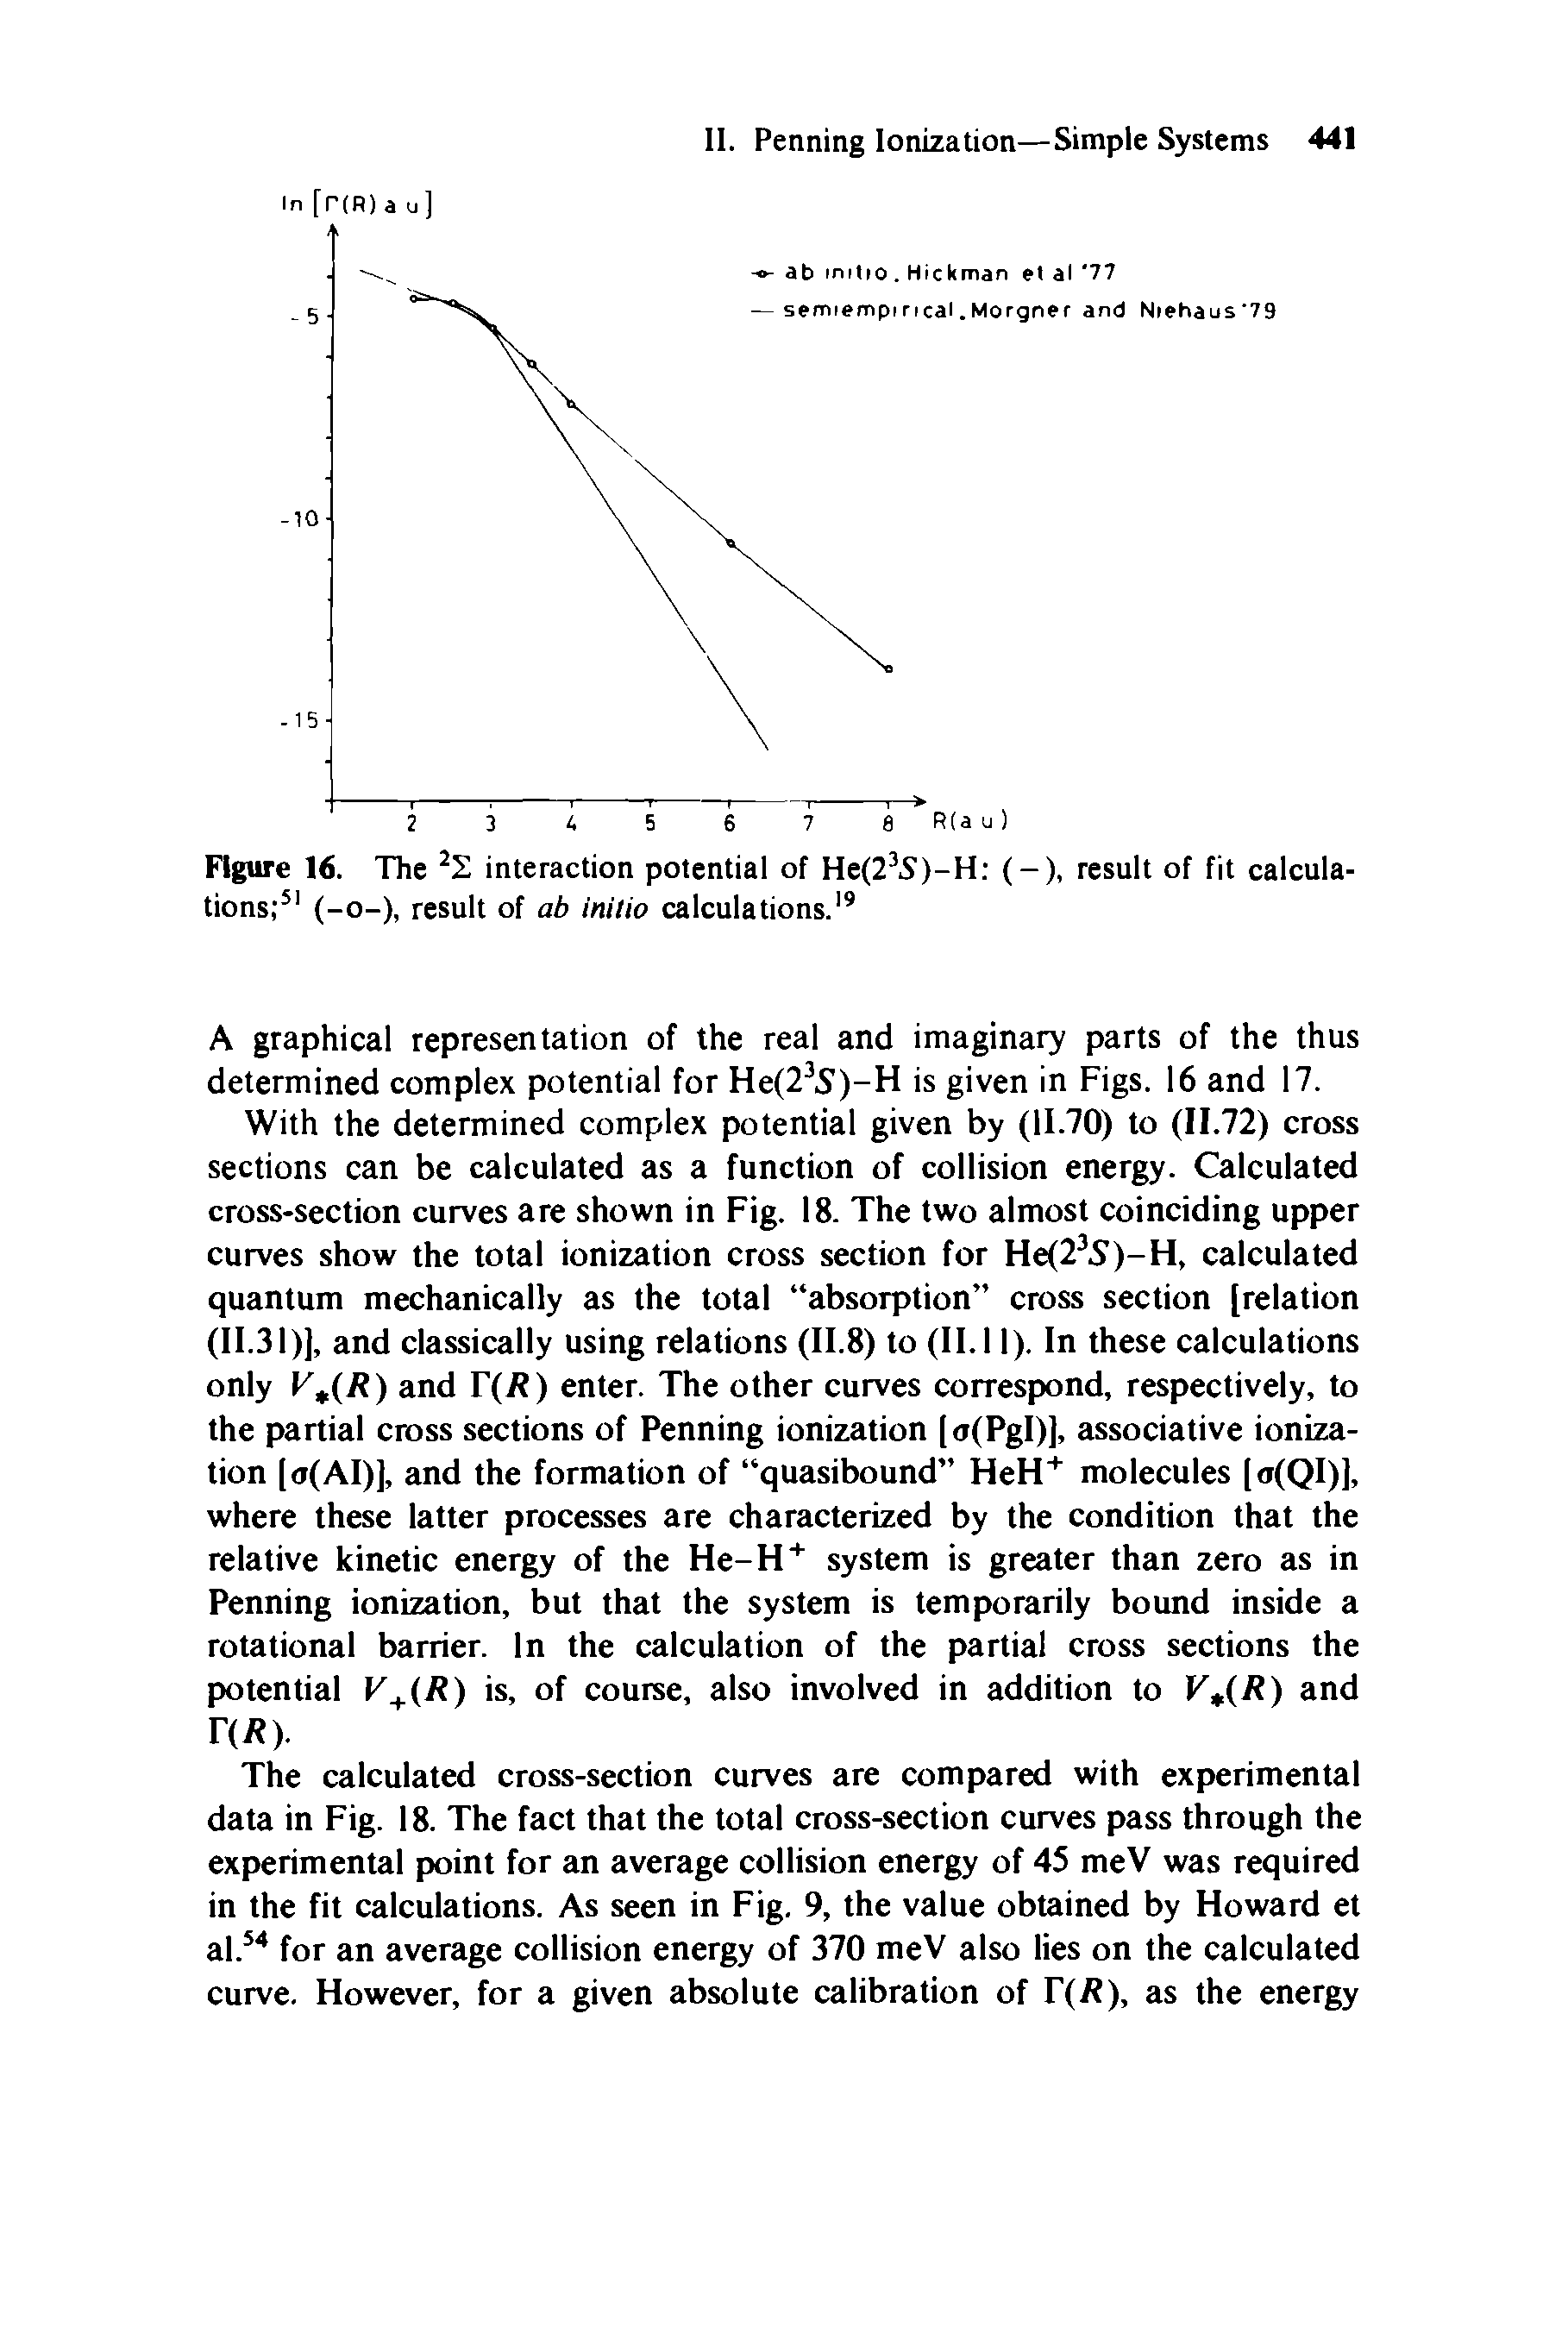 Figure 16. The 2S interaction potential of He(23S)-H (-), result of fit calculations 51 (-o-), result of ab initio calculations.19...